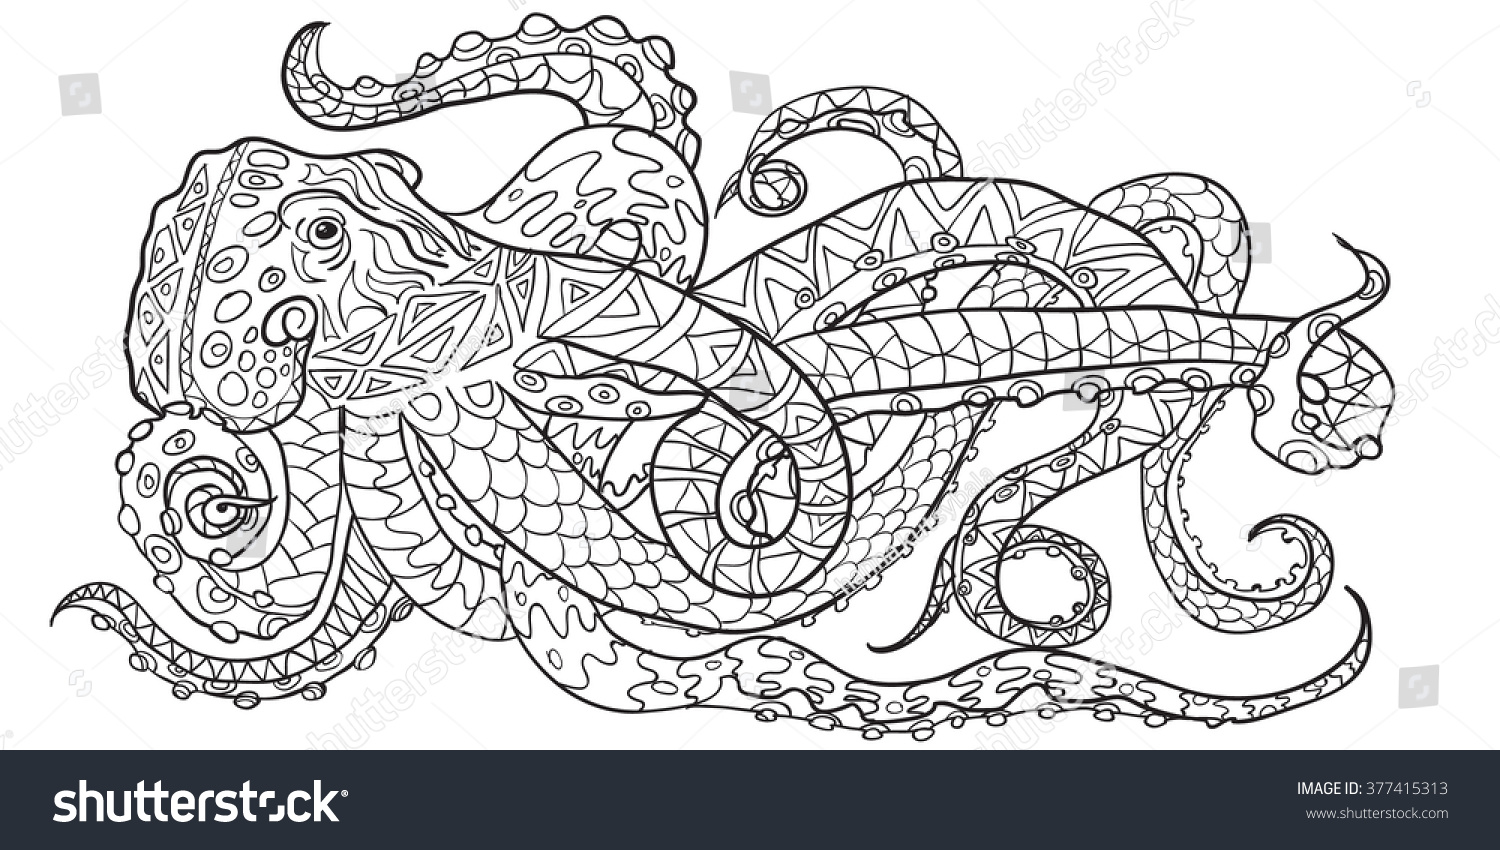 Hand drawn Coloring pages with octopus zen tangle illustration for adult anti stress Coloring books